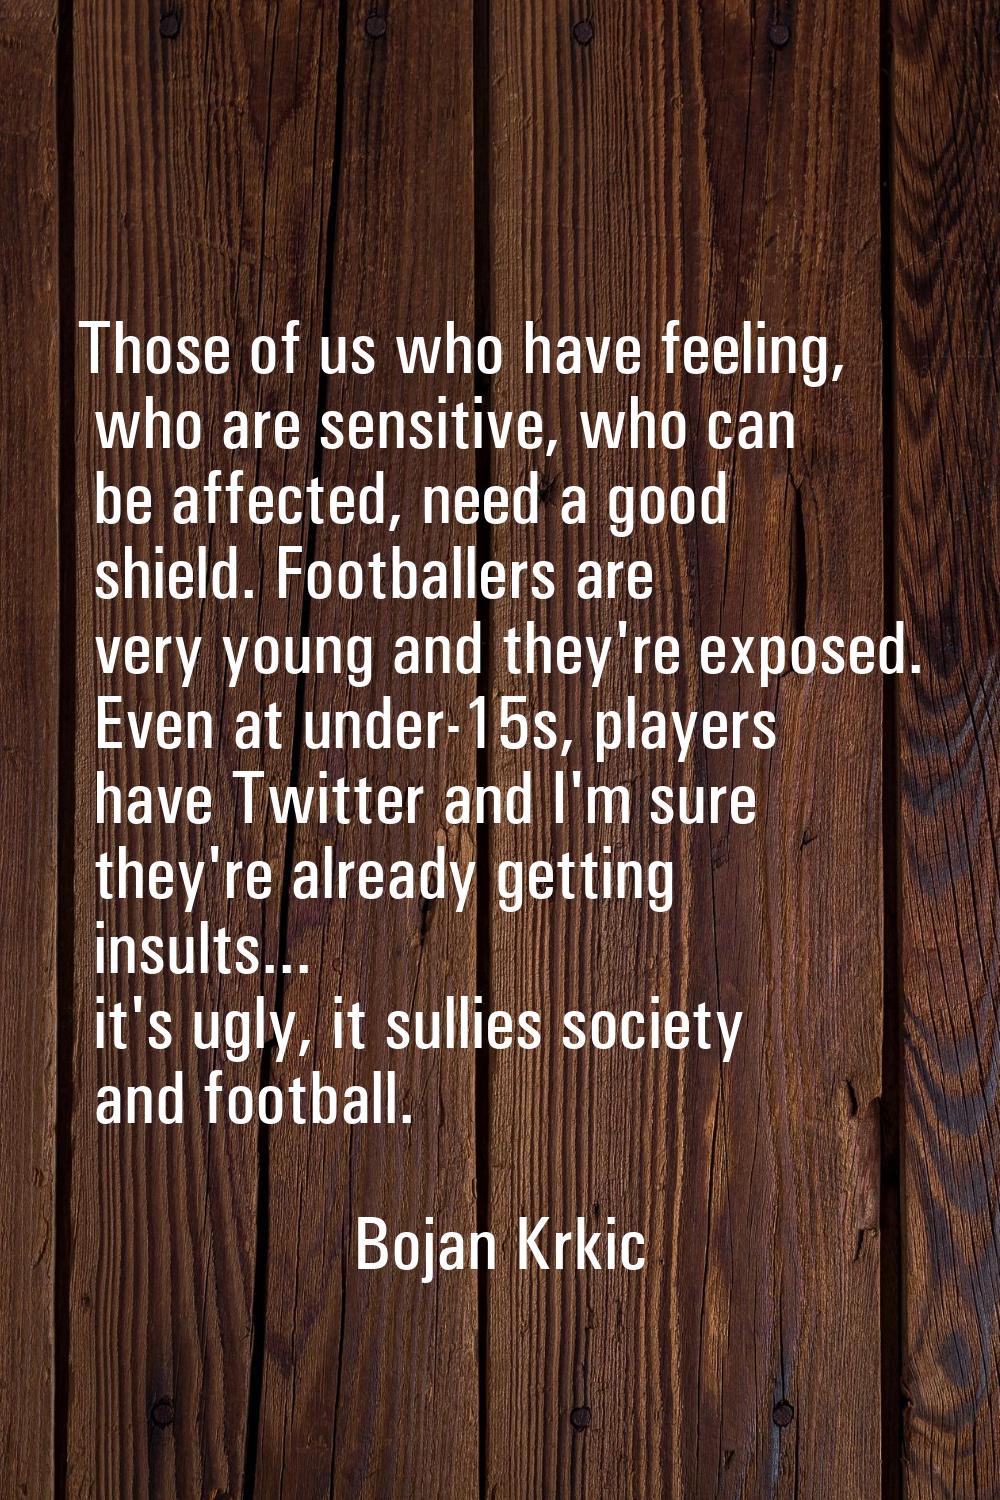 Those of us who have feeling, who are sensitive, who can be affected, need a good shield. Footballe